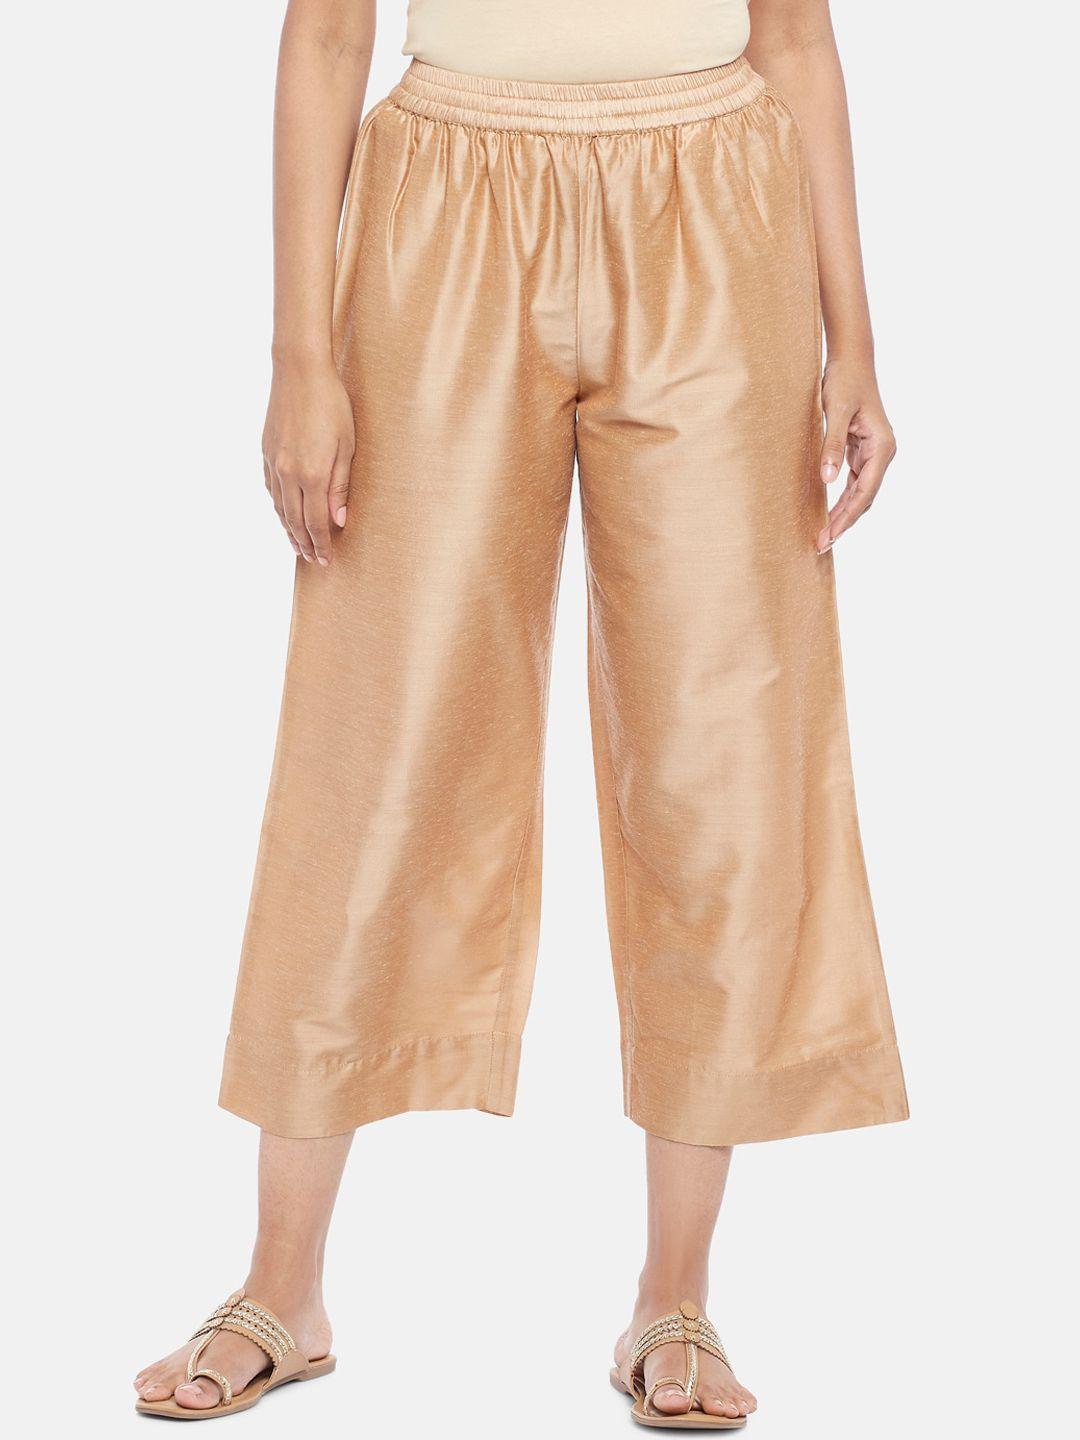 rangmanch by pantaloons women gold-toned culottes trousers